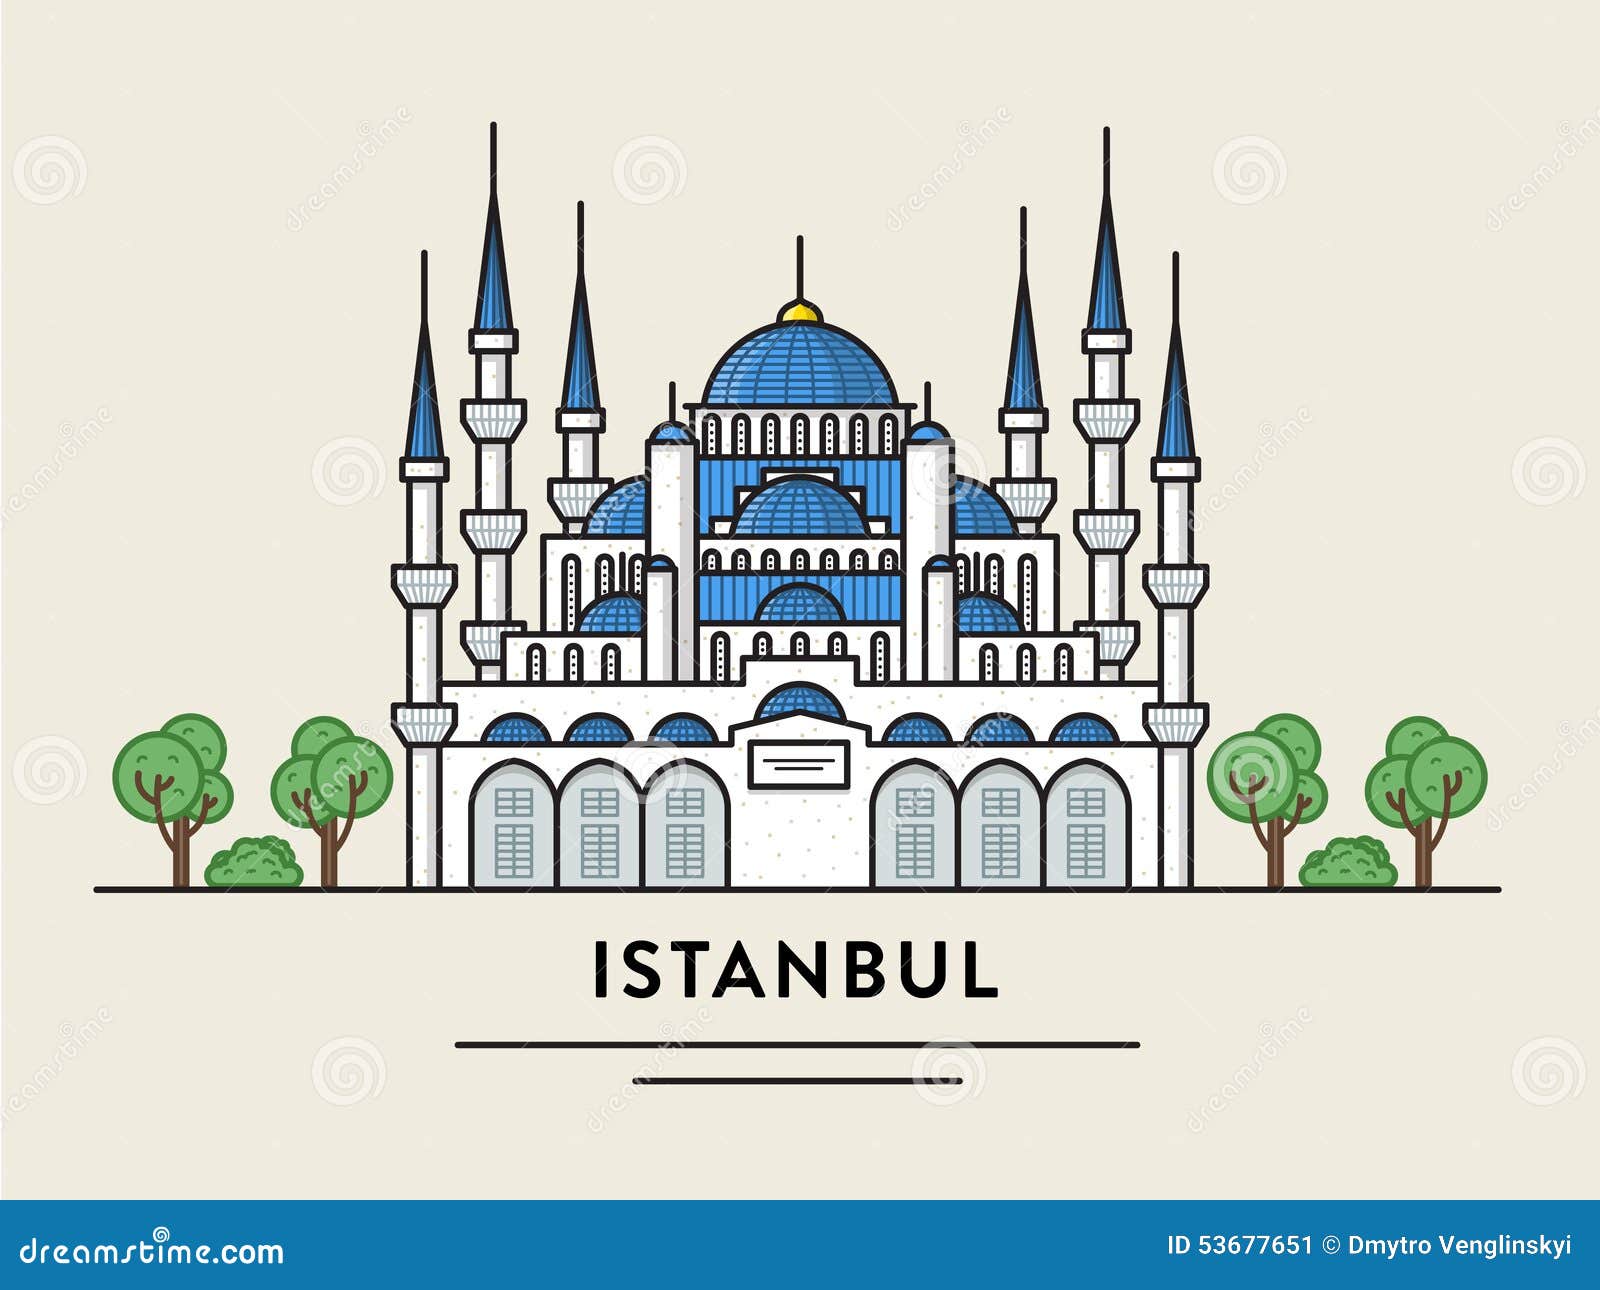 istanbul clipart - photo #14